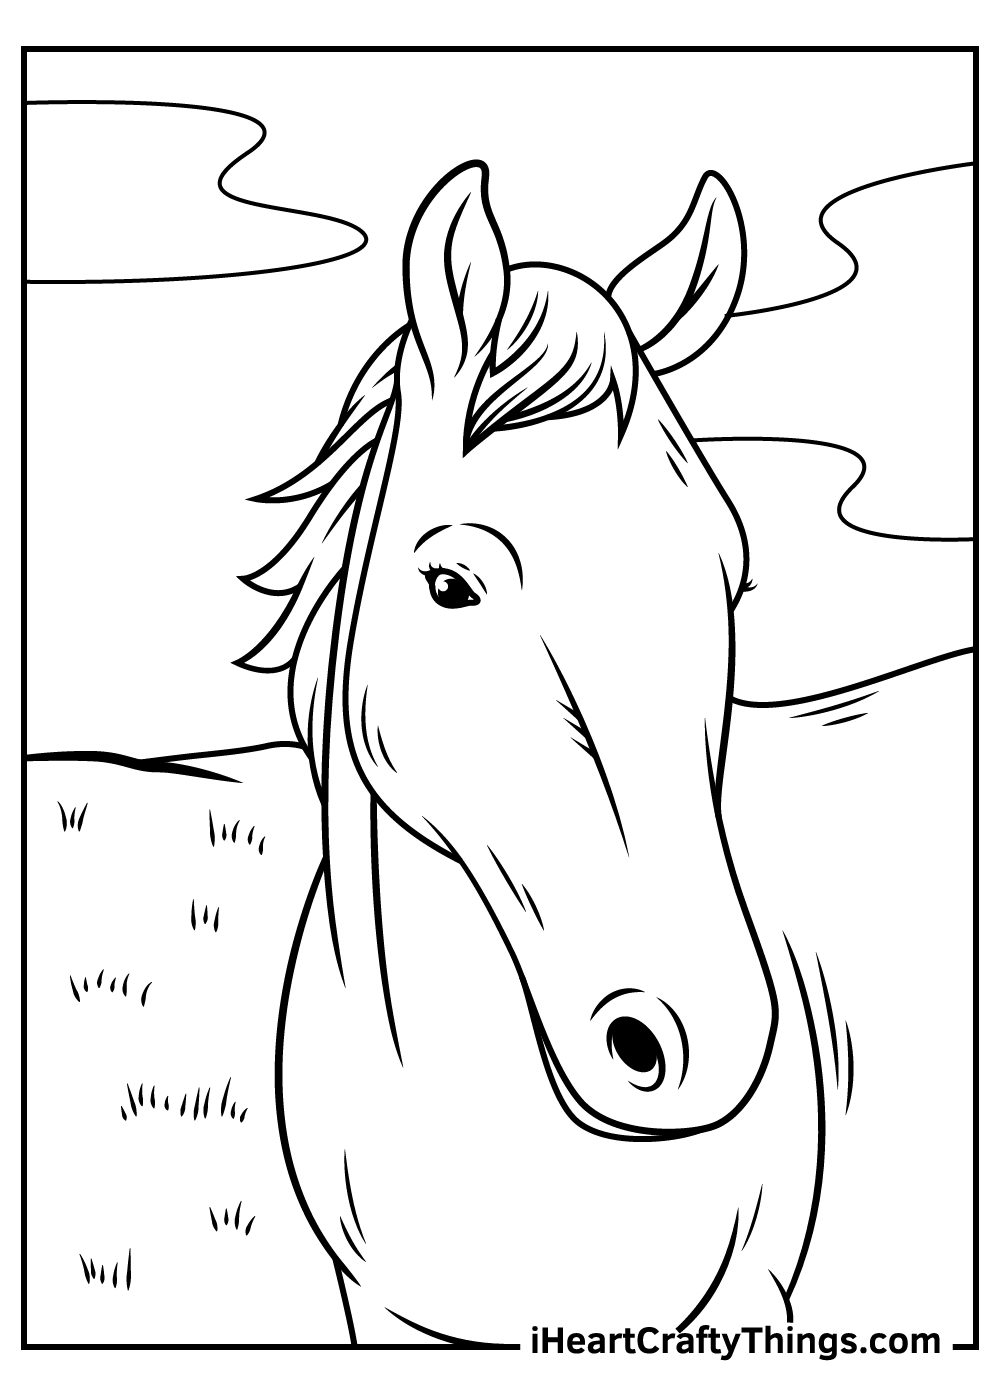 Realistic Horse Coloring Pages Updated 20